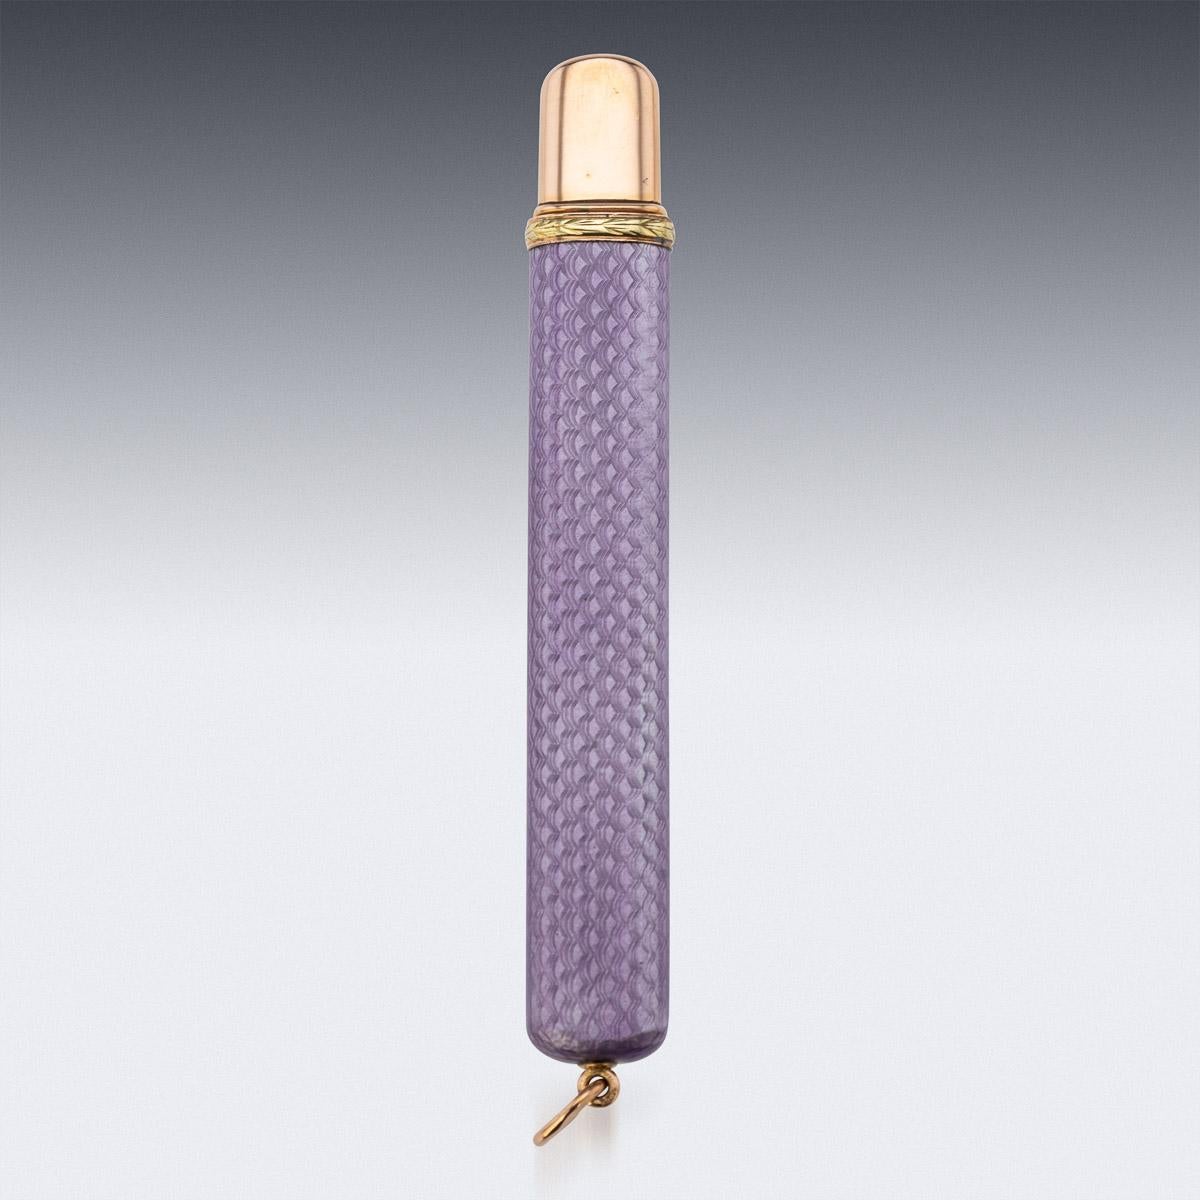 Antique early-20th century Imperial Russian two-colour gold-mounted guilloche enamel pencil holder, of flattened rectangular form, enameled in translucent purple over a wavy guilloché ground, the gold collar decorated with gold leaf boarder.